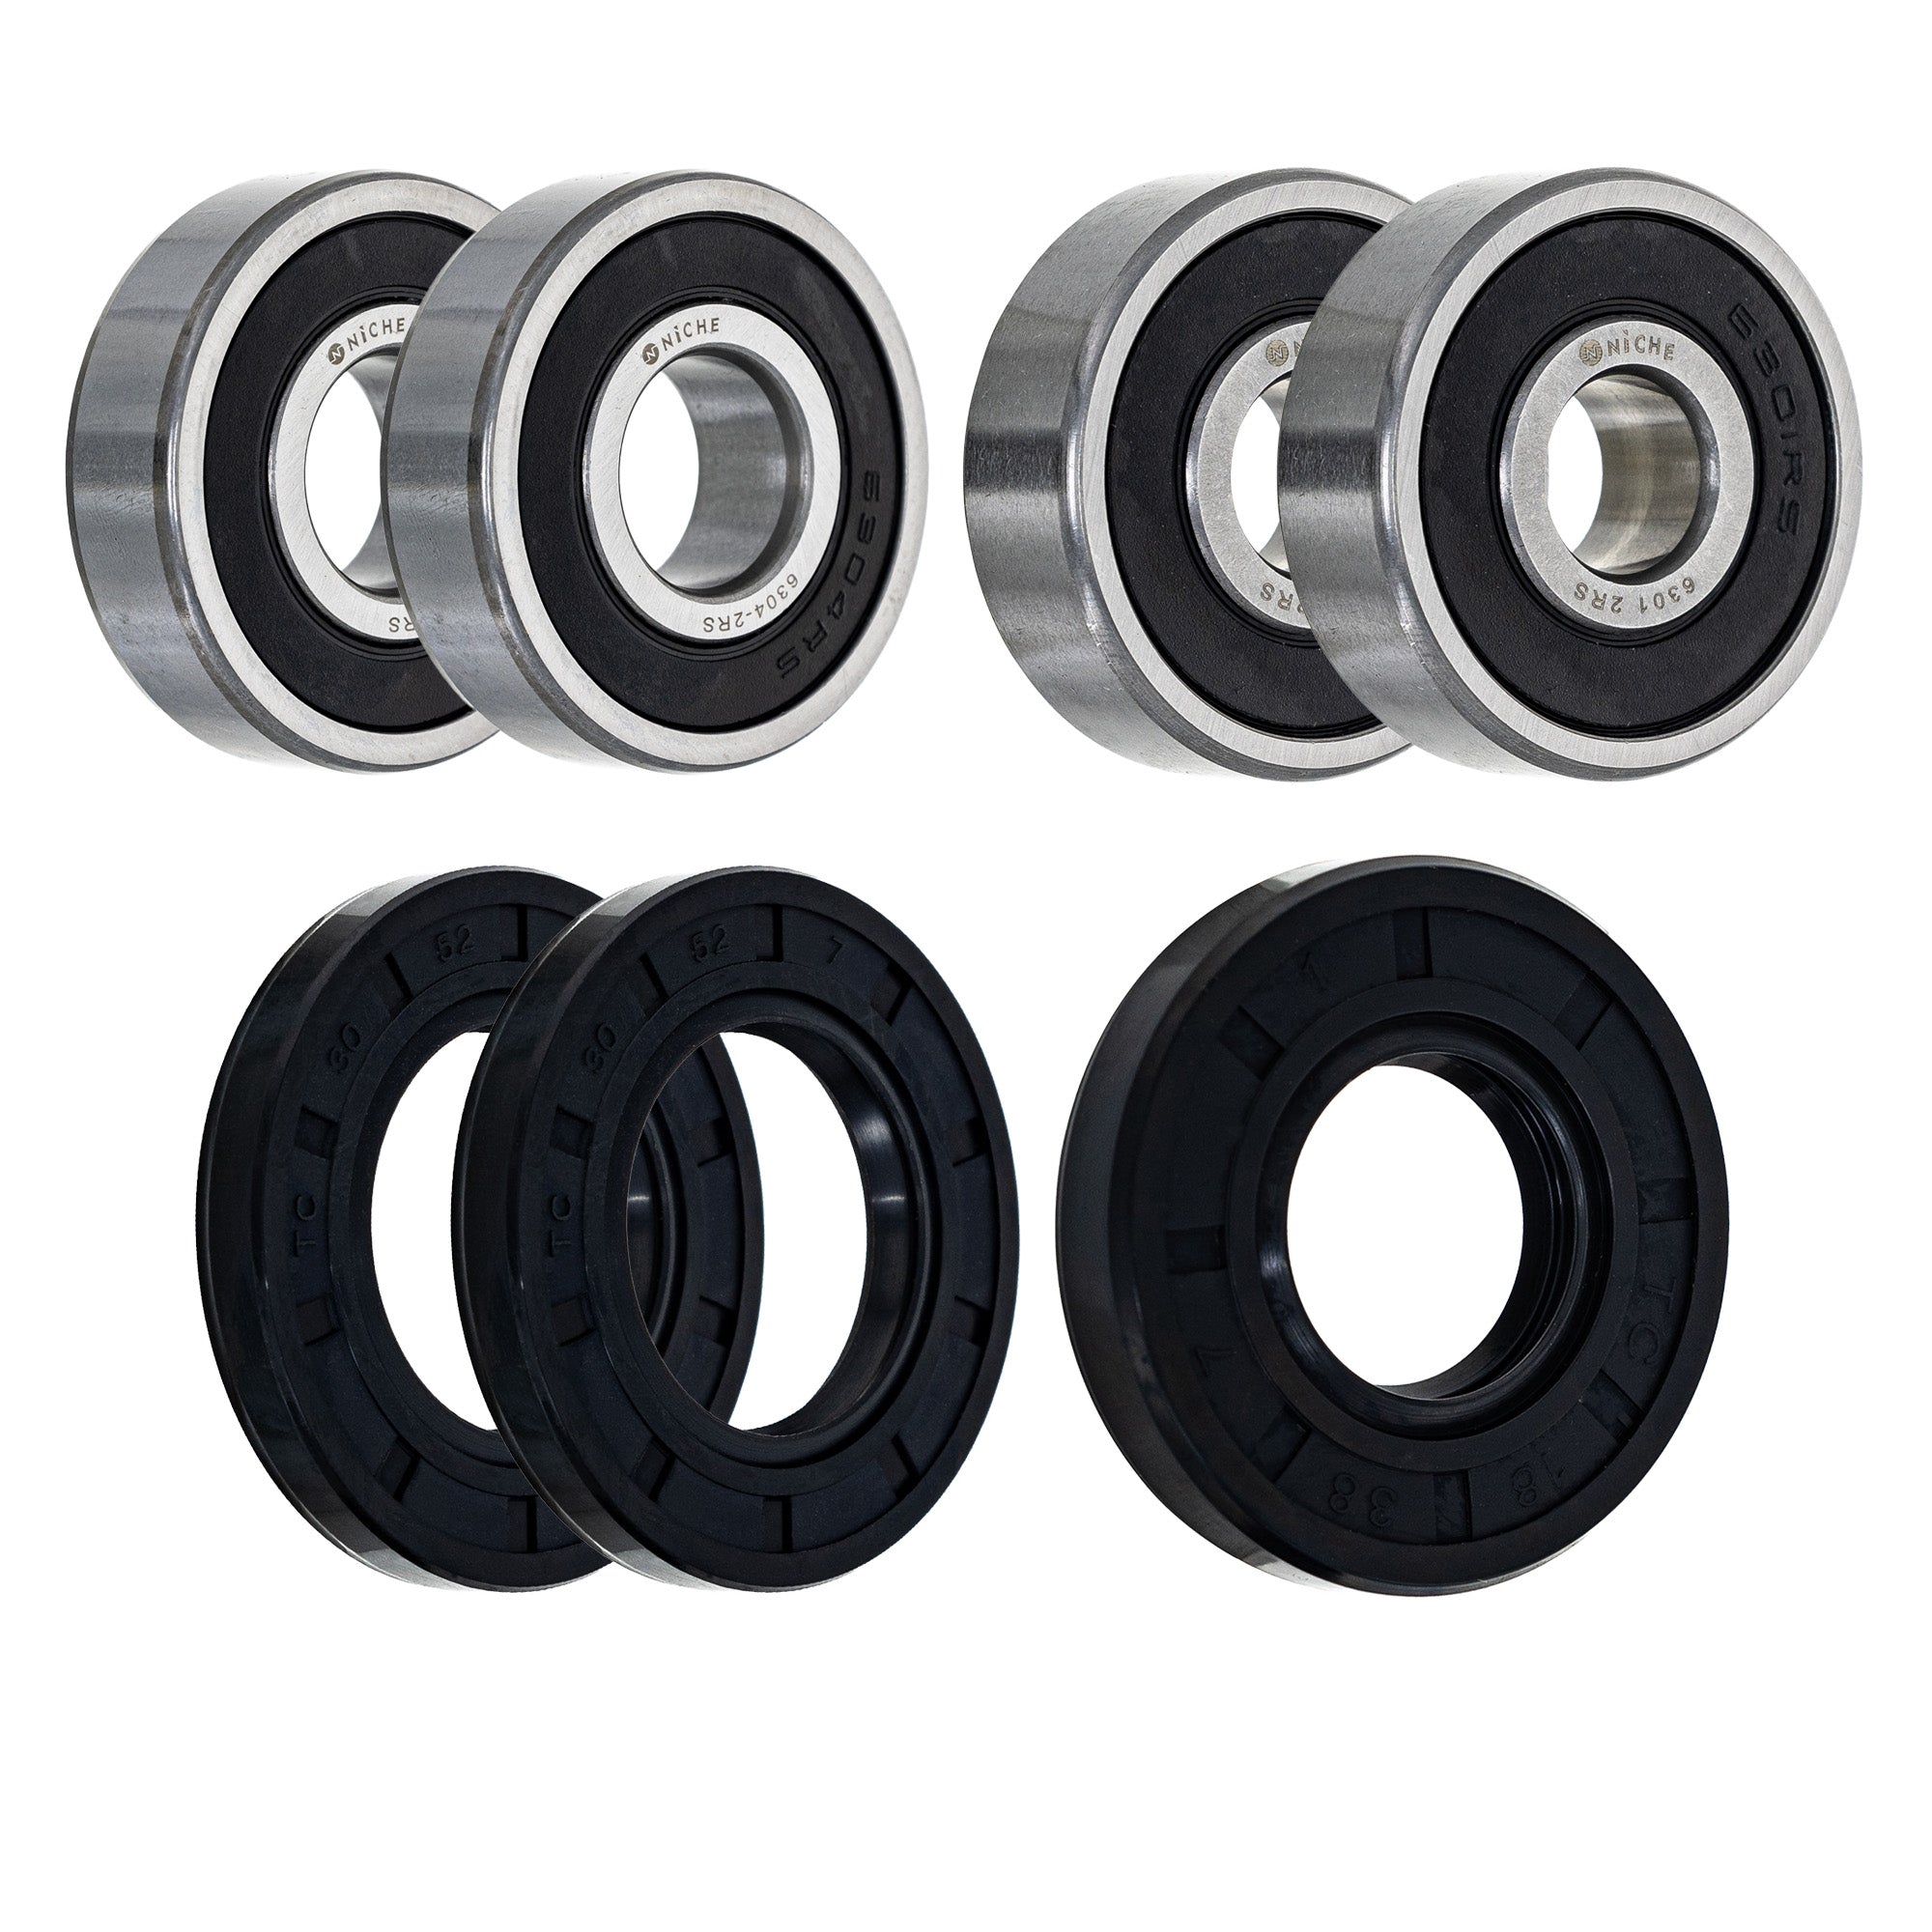 Wheel Bearing Seal Kit for zOTHER TS100 NICHE MK1008736